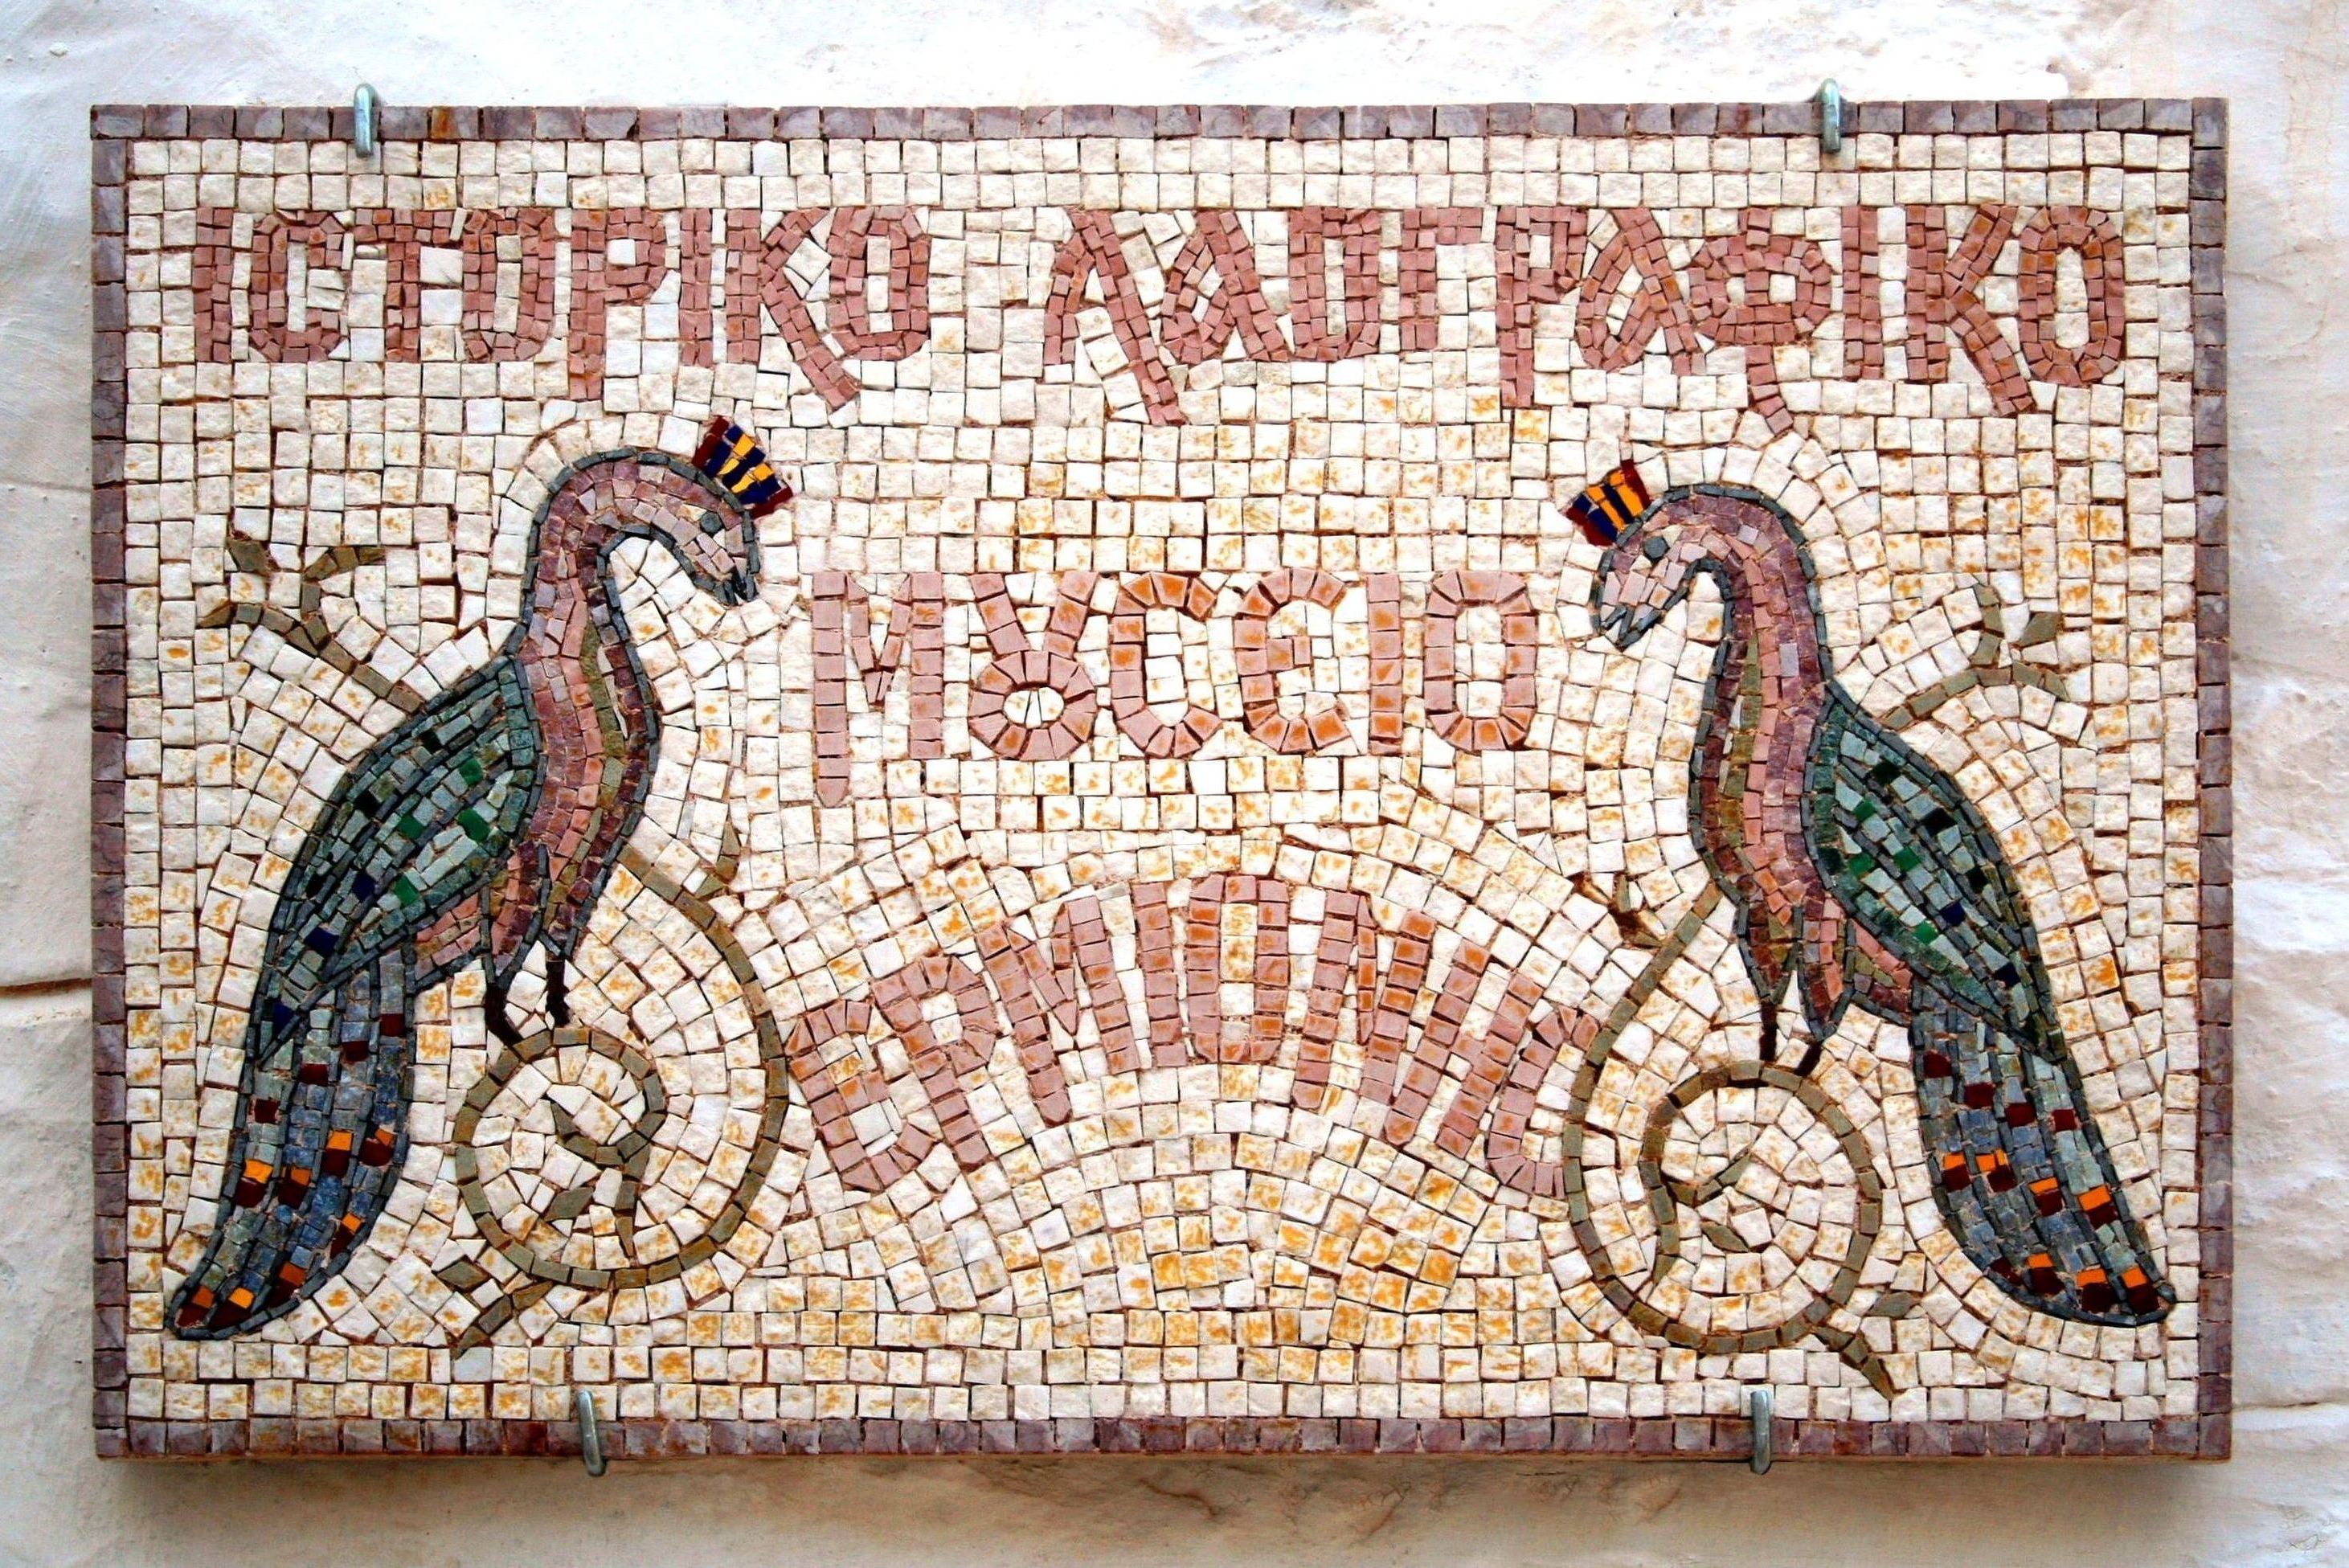 The Ermioni museum of history and folklore mosaic  